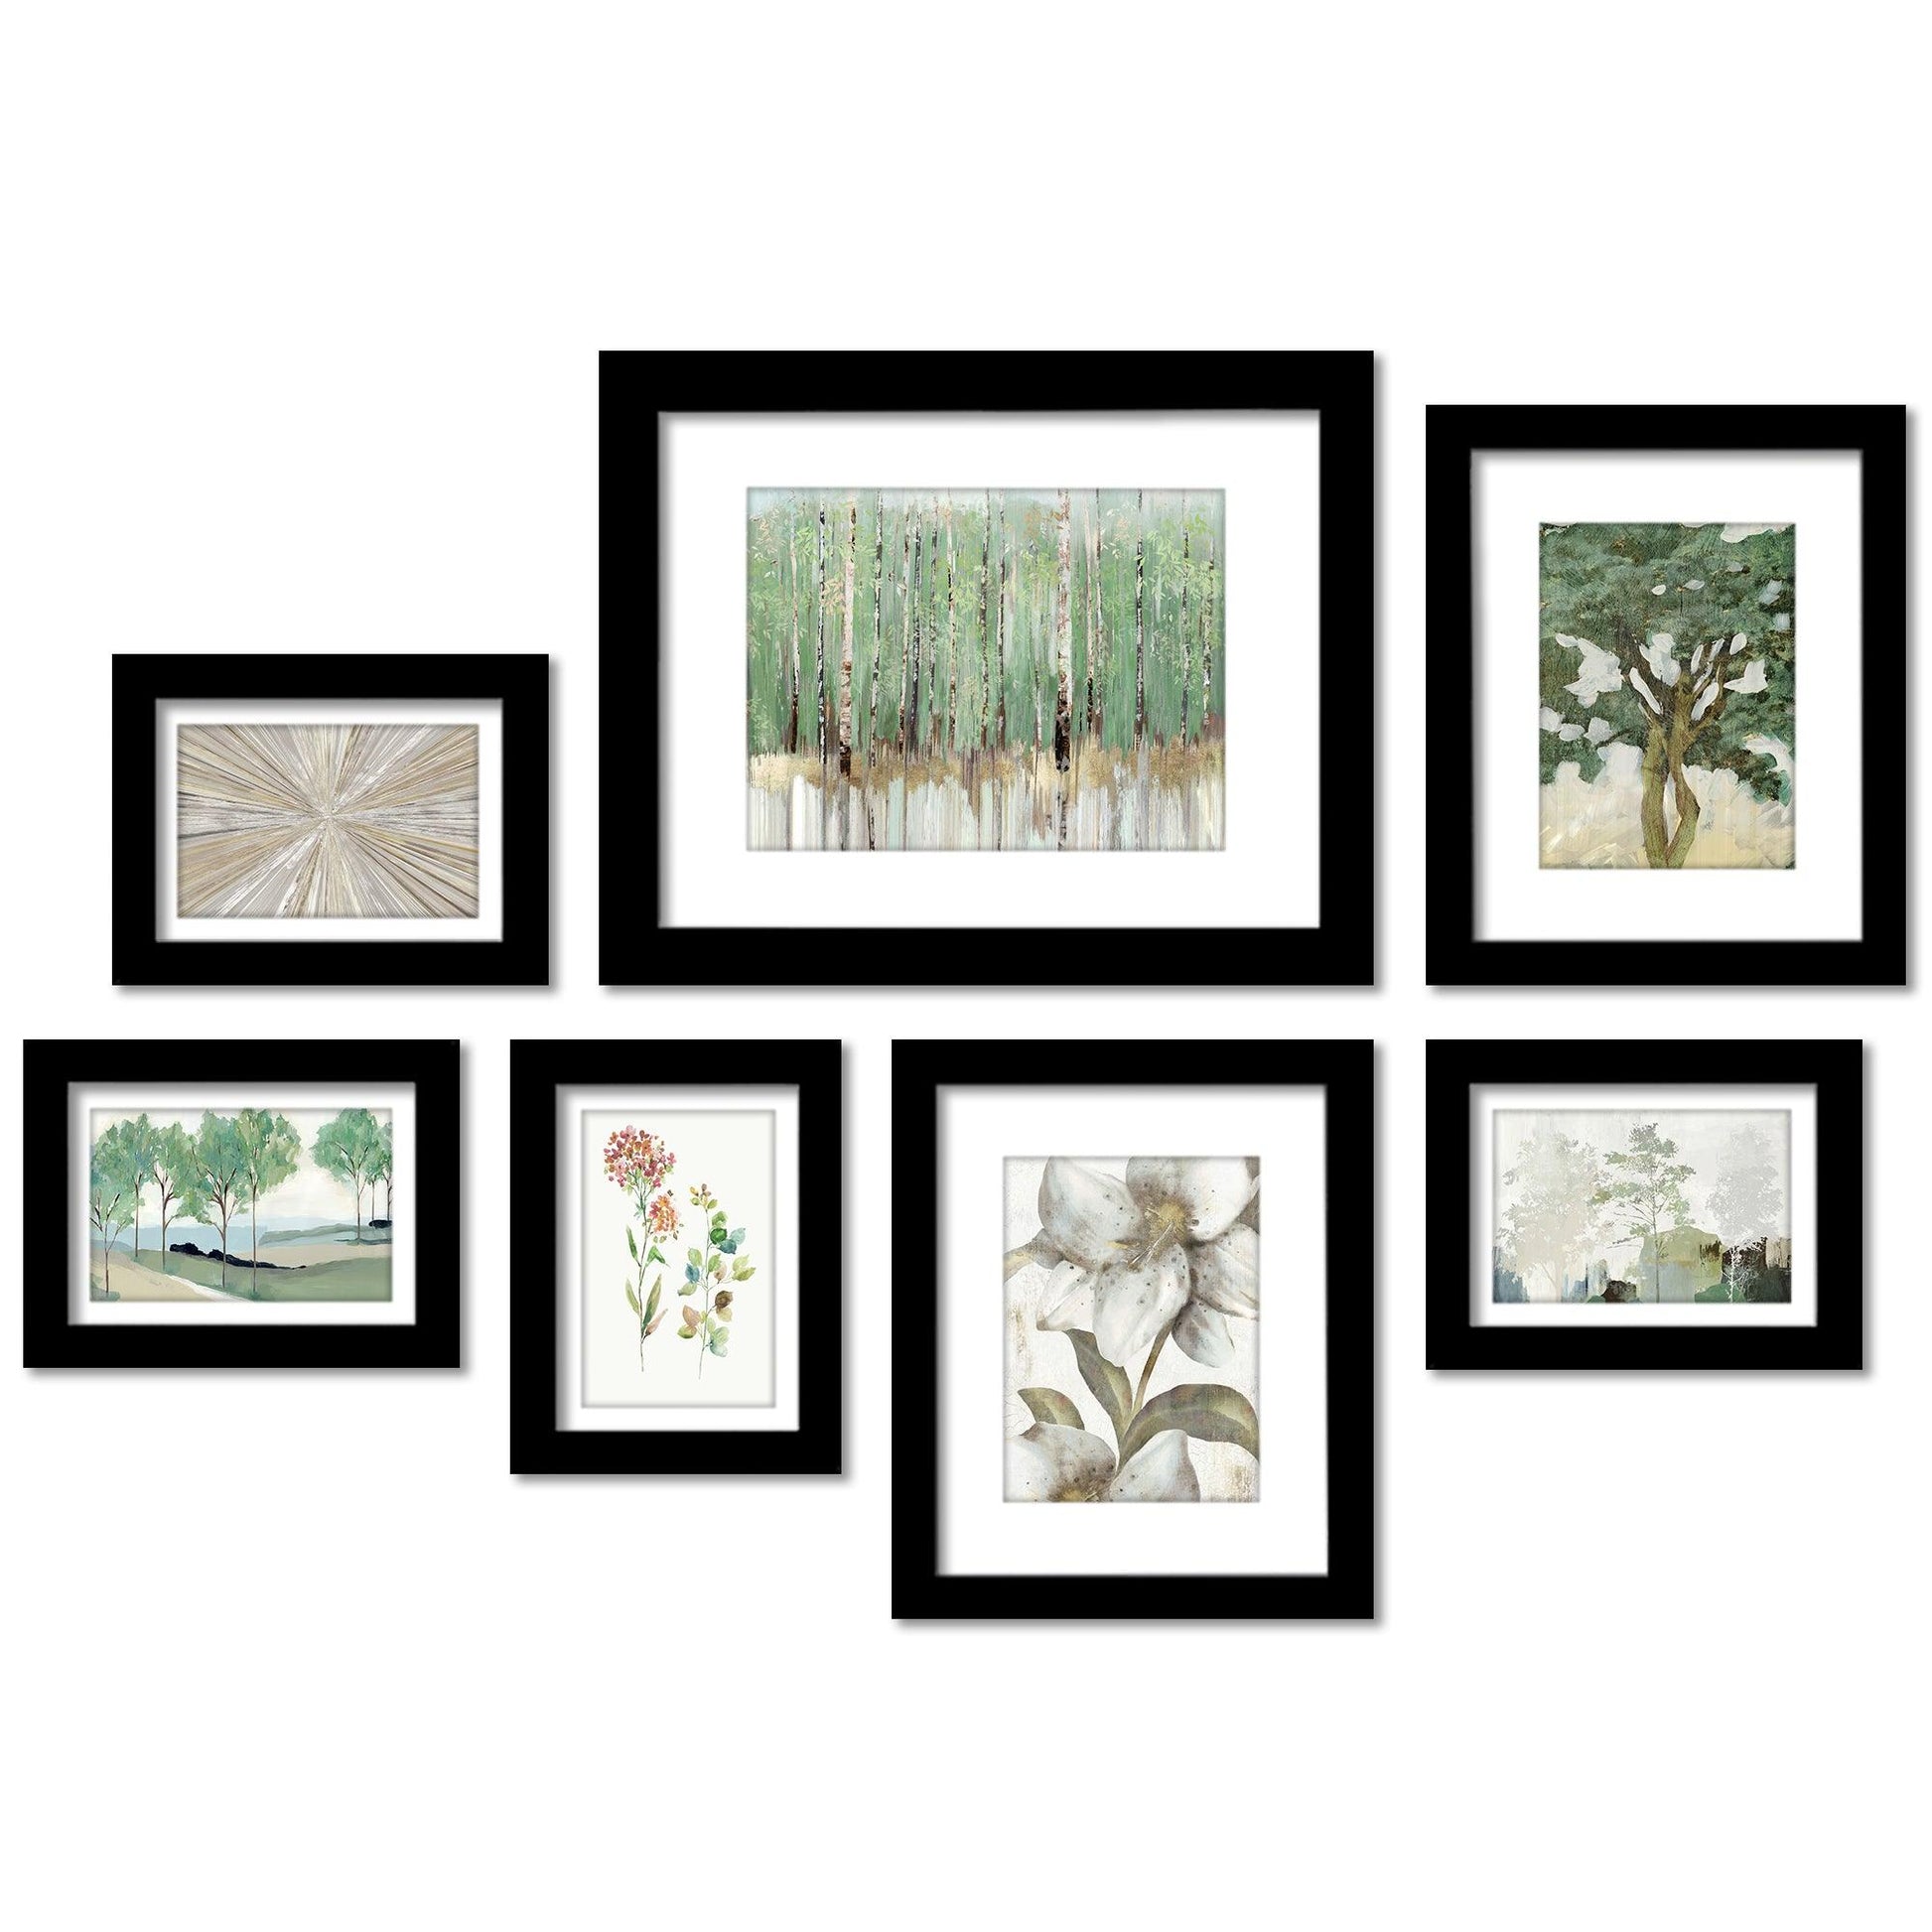 Soft Nature by PI Creative - 7 Piece Framed Gallery Wall Art Set - Americanflat